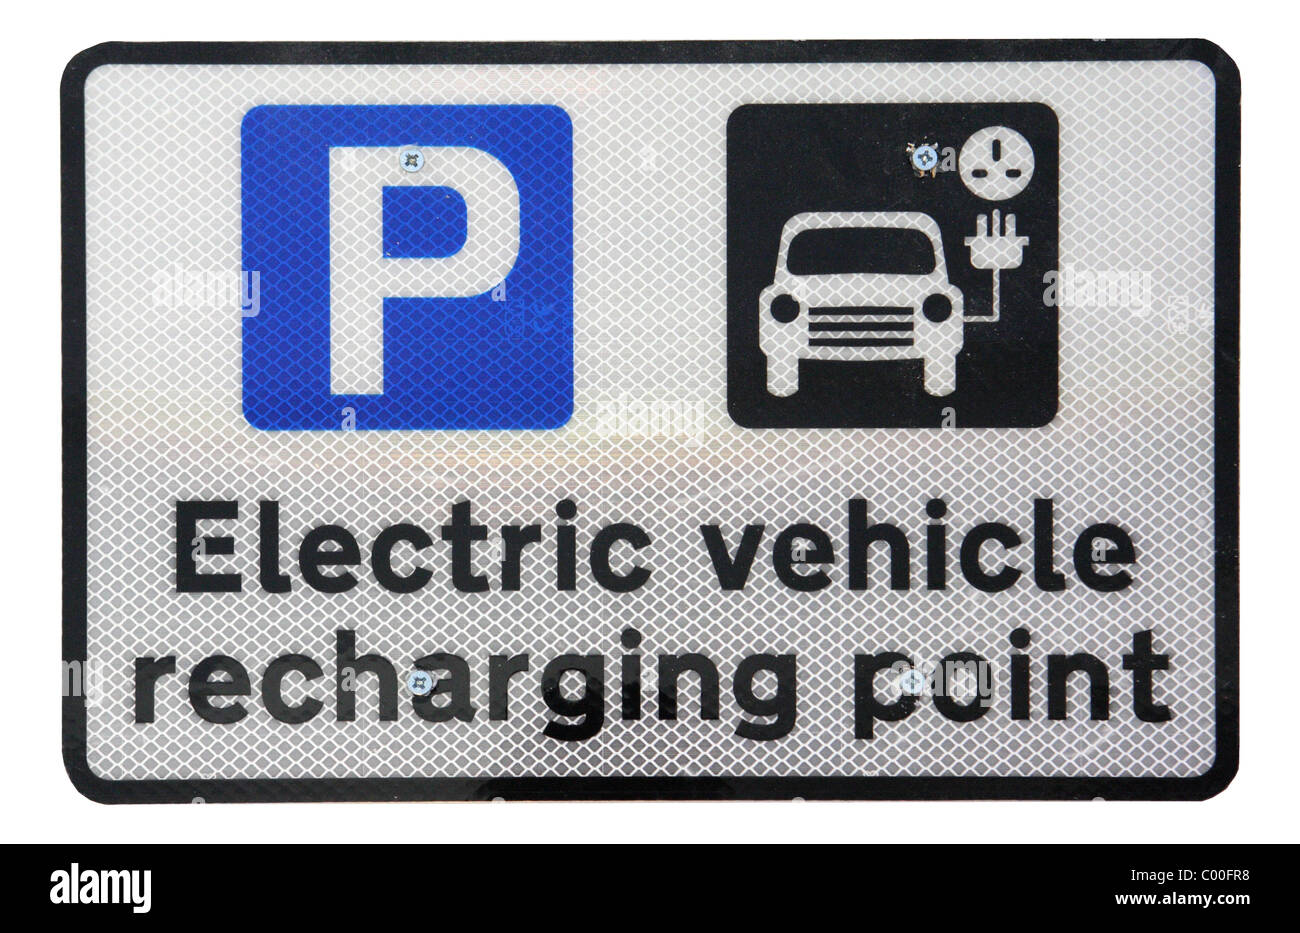 Sign showing Electric vehicle recharging point at St Mary's car park in Sunderland, North East, England Stock Photo